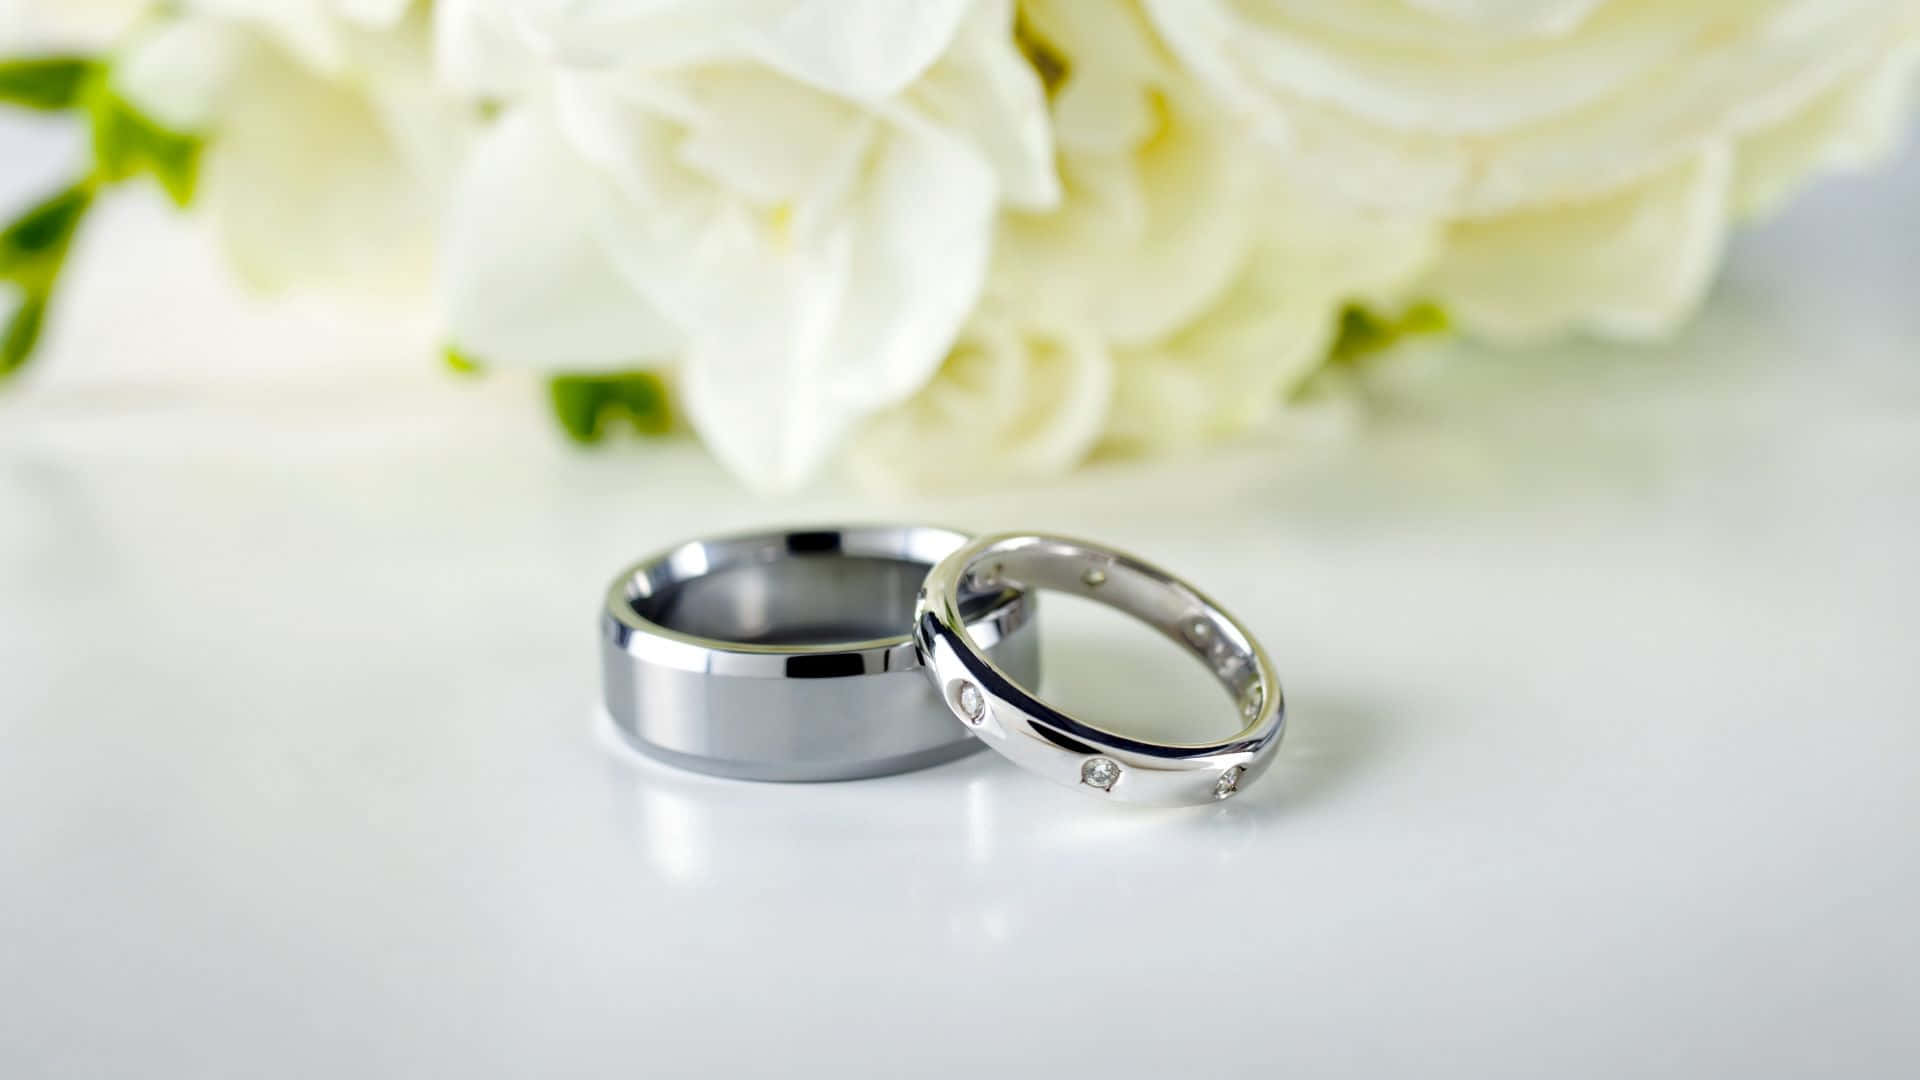 Silver Wedding Ring With White Flowers Wallpaper